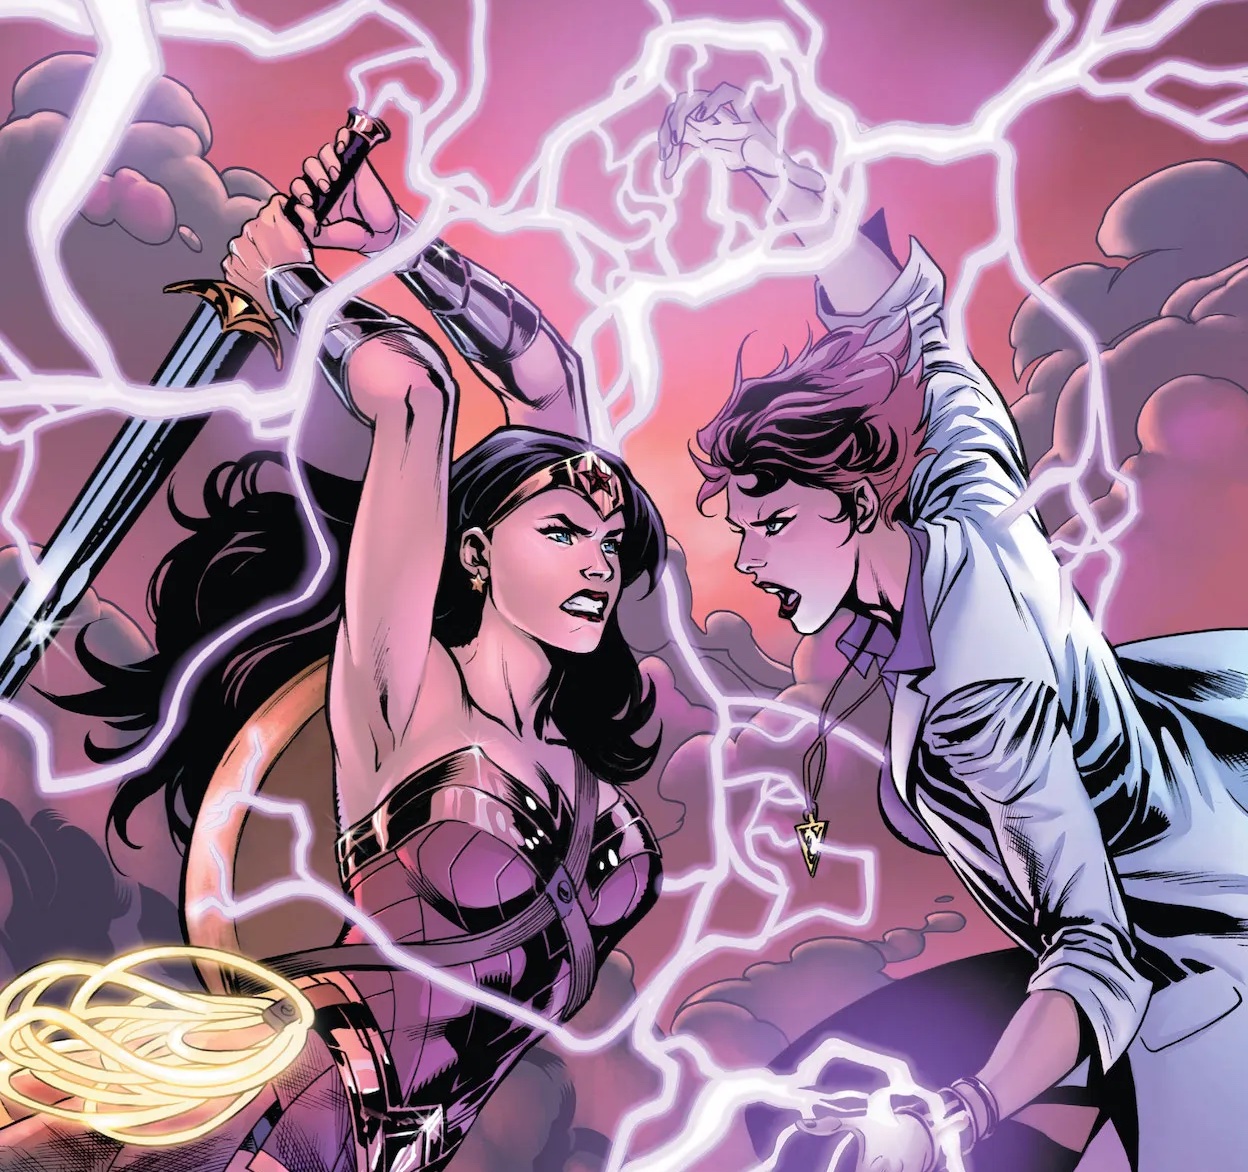 'Sensational Wonder Woman Special' #1 has three good stories that stand on their own